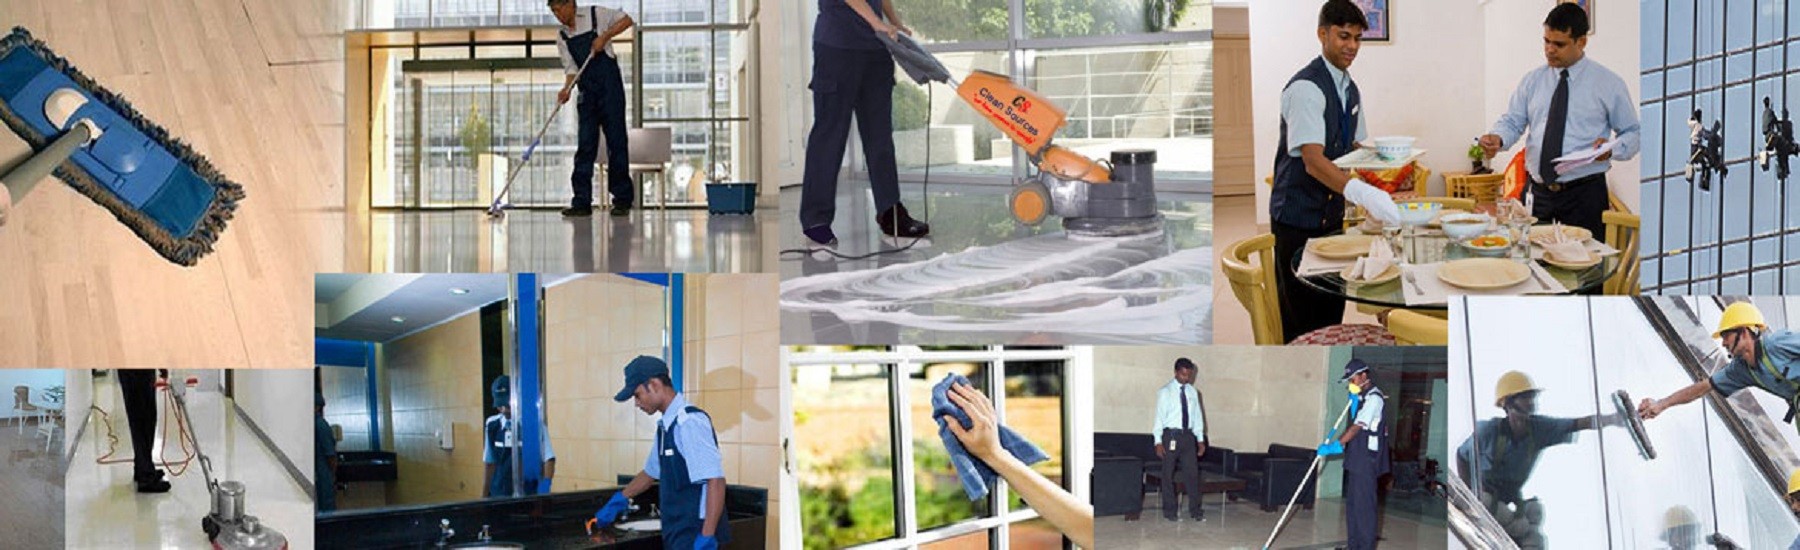 Pest Control, Security/ Guard service, Other specialized jobs; Exp: 2 year